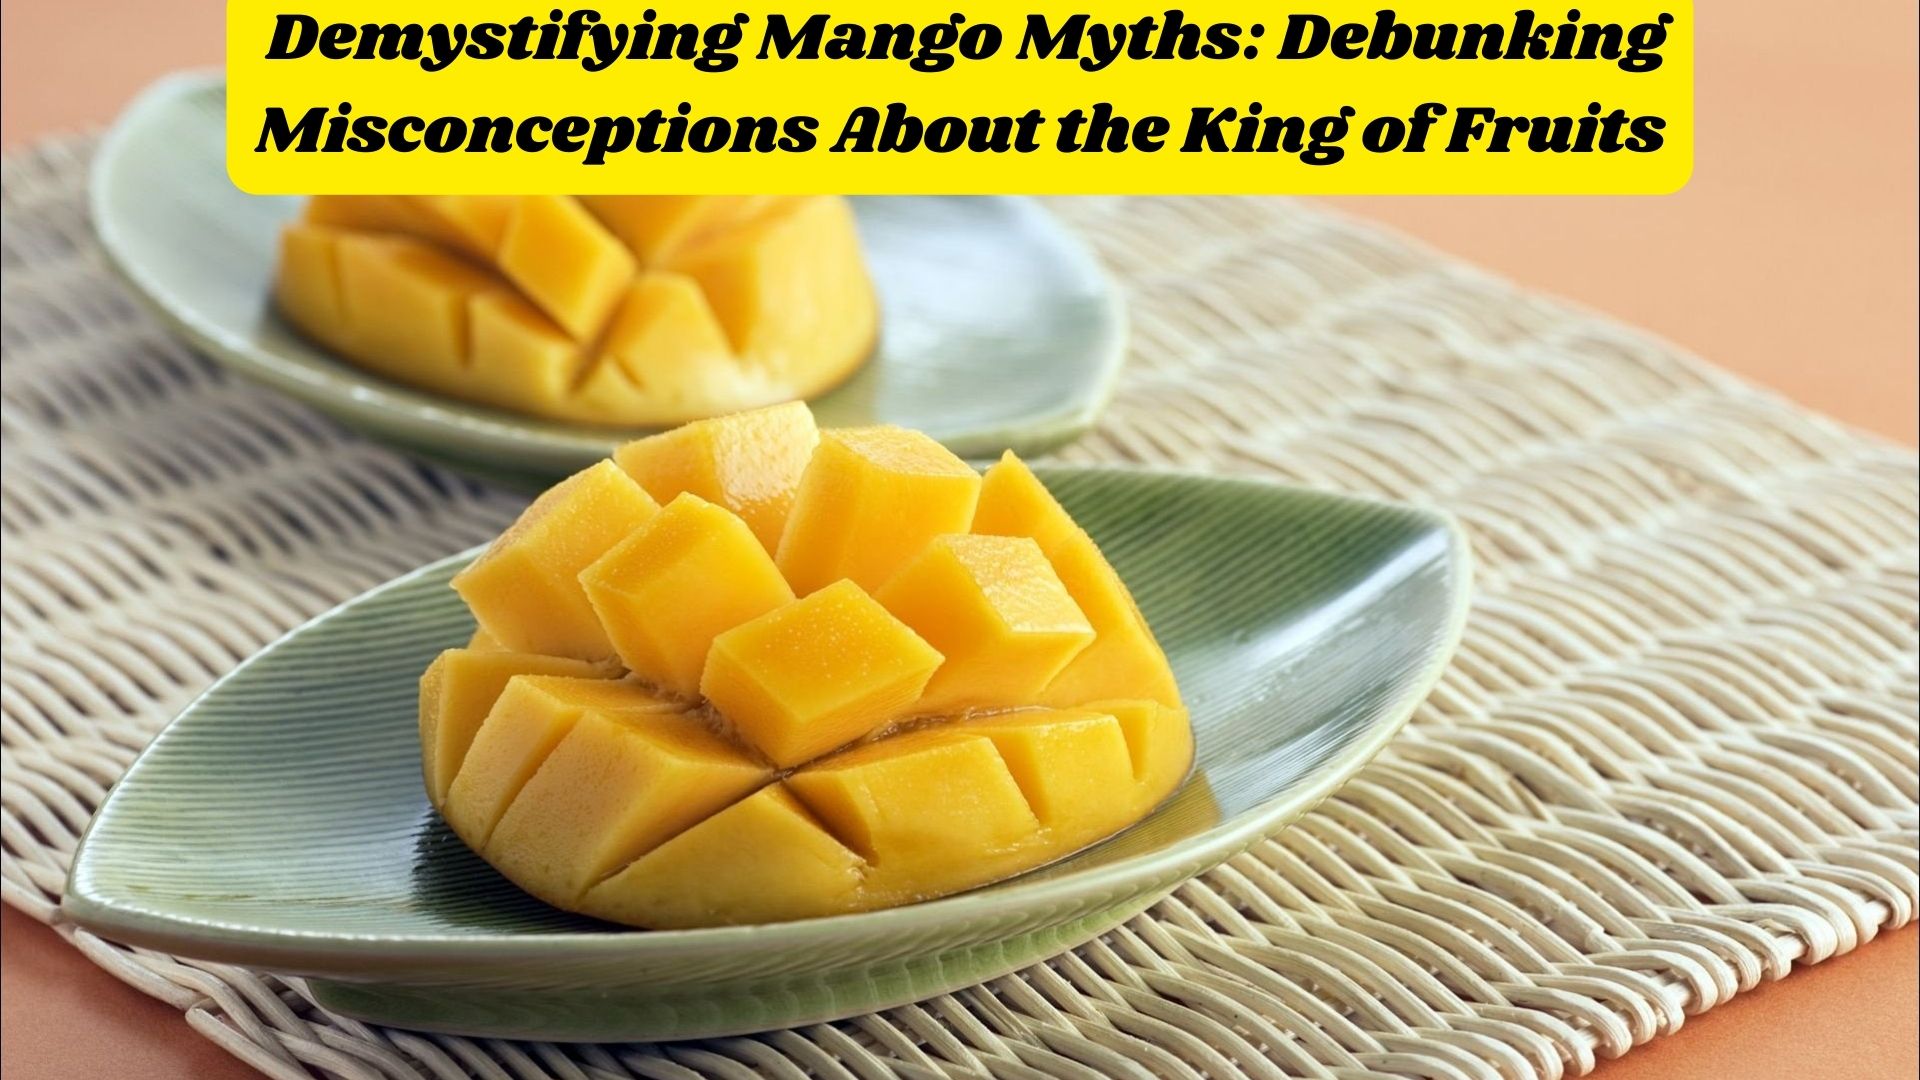 Demystifying Mango Myths: Debunking Misconceptions About the King of Fruits